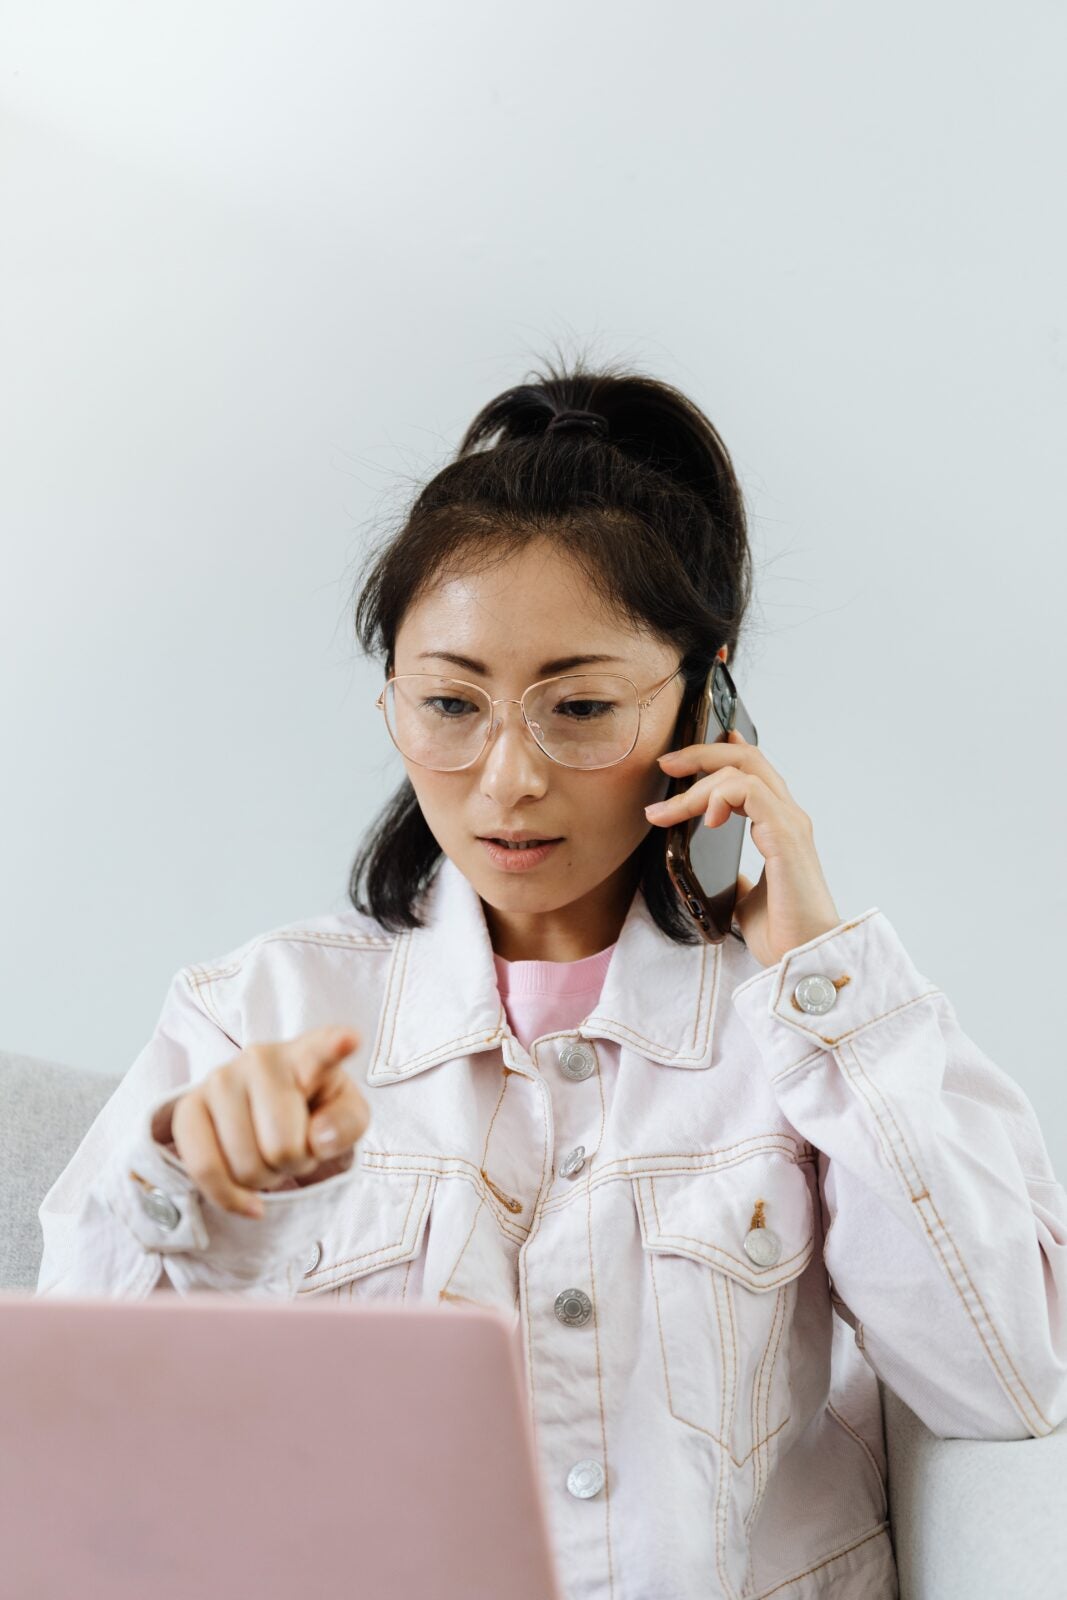 An Asian woman wearing glasses and a jacket using the phone while a pink laptop rests on her lap.